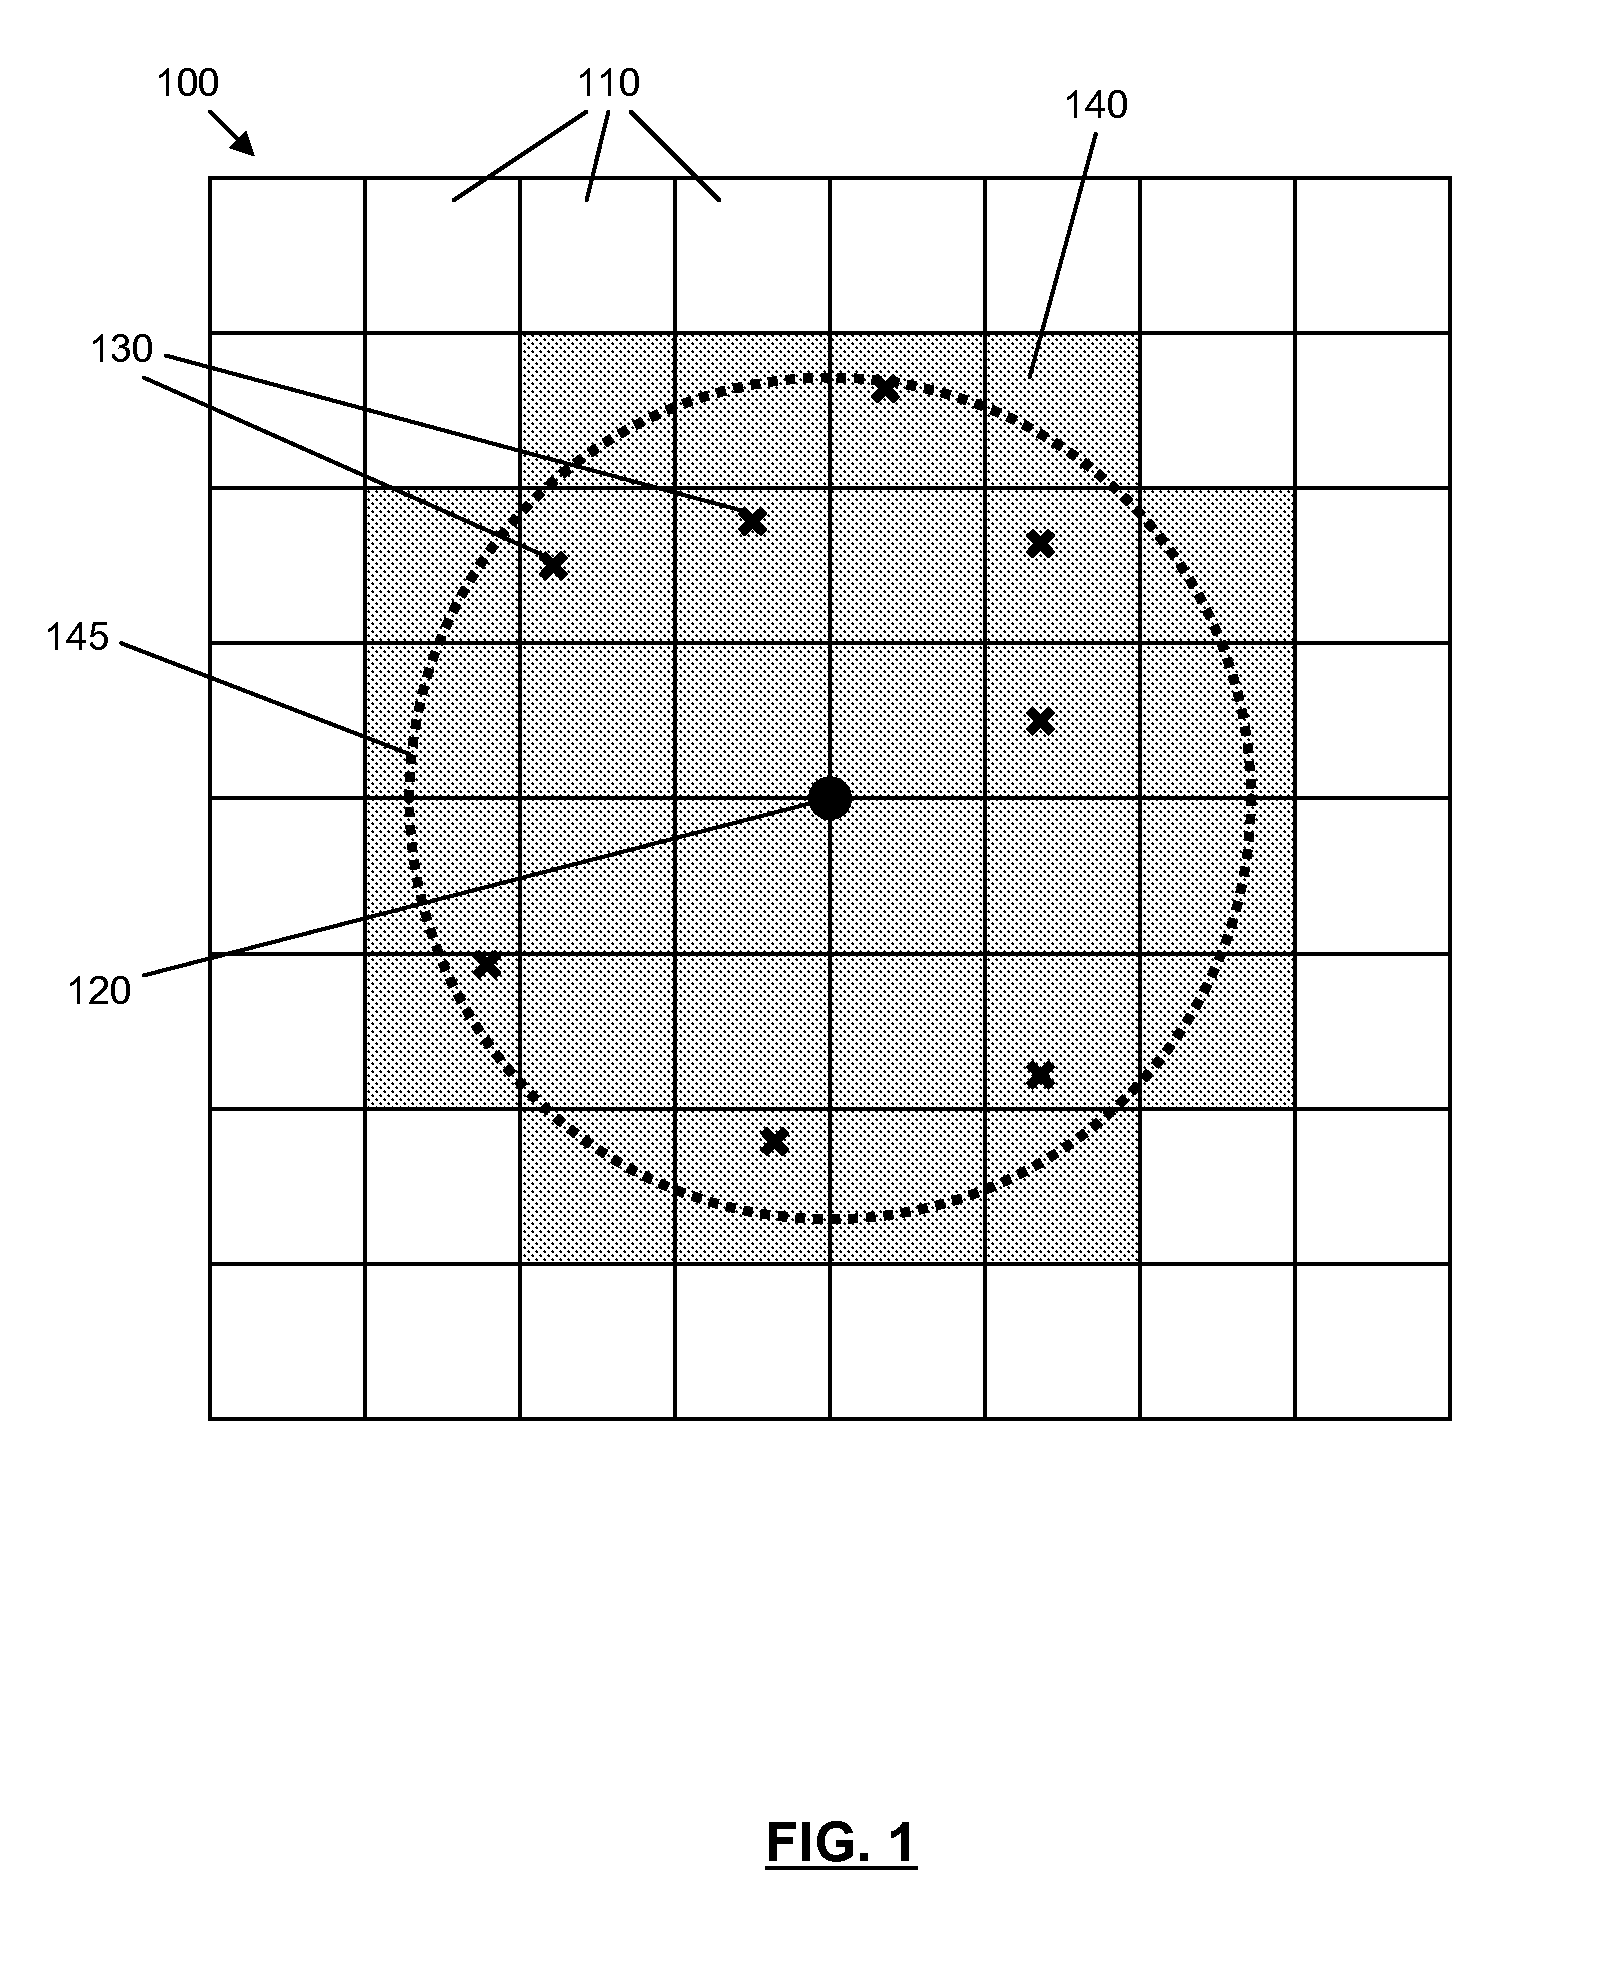 Method and apparatus for deriving pathloss estimation values